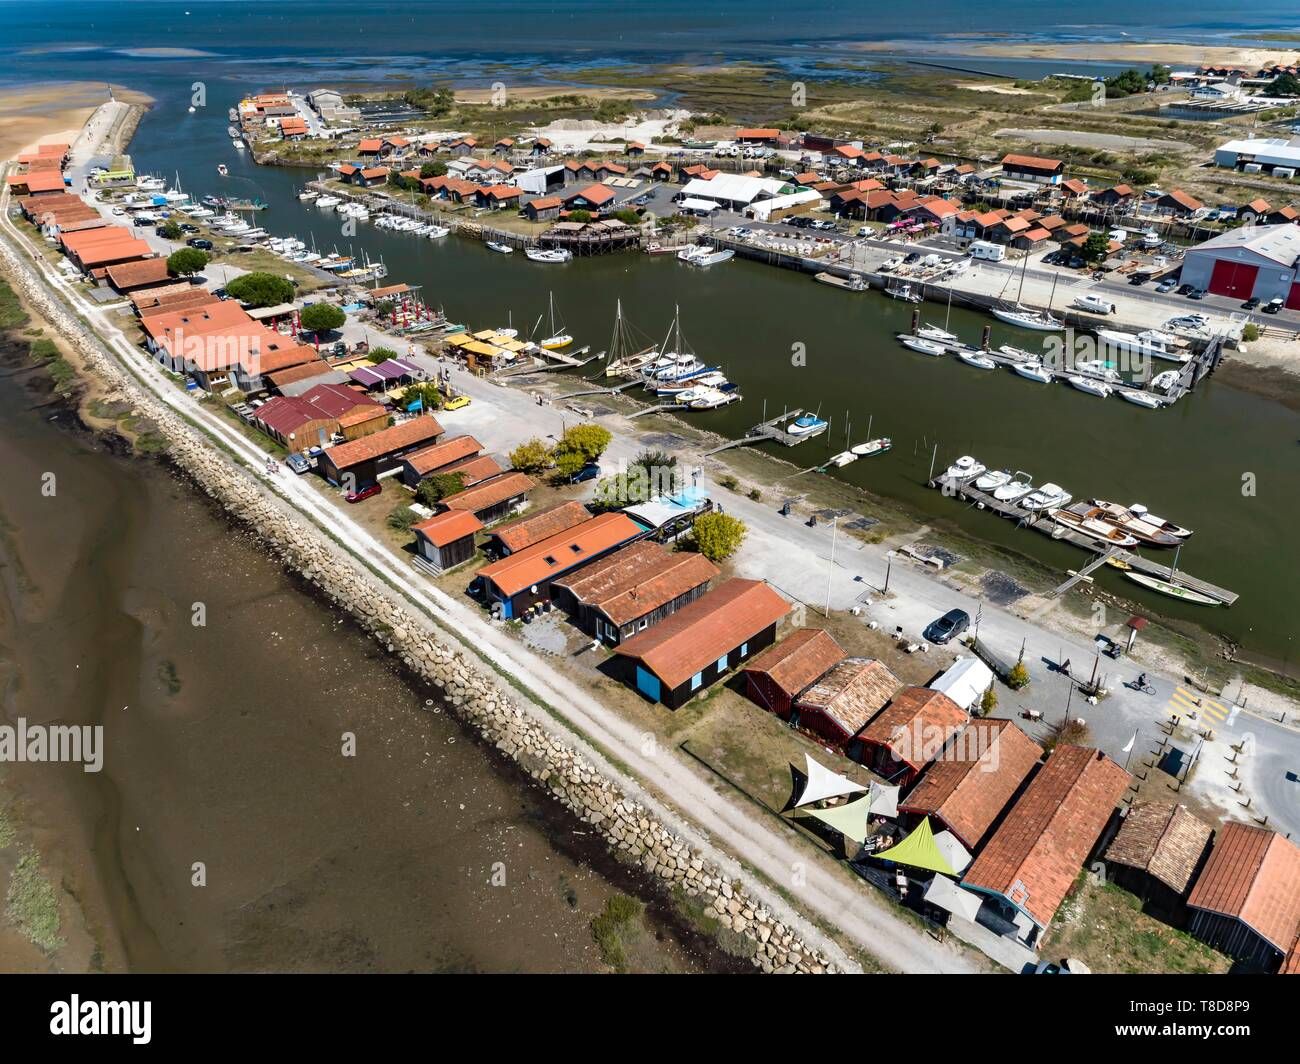 France, Gironde, Bassin d'Arcachon, Gujan Mestras, oyster port of Larros  (aerial view Stock Photo - Alamy